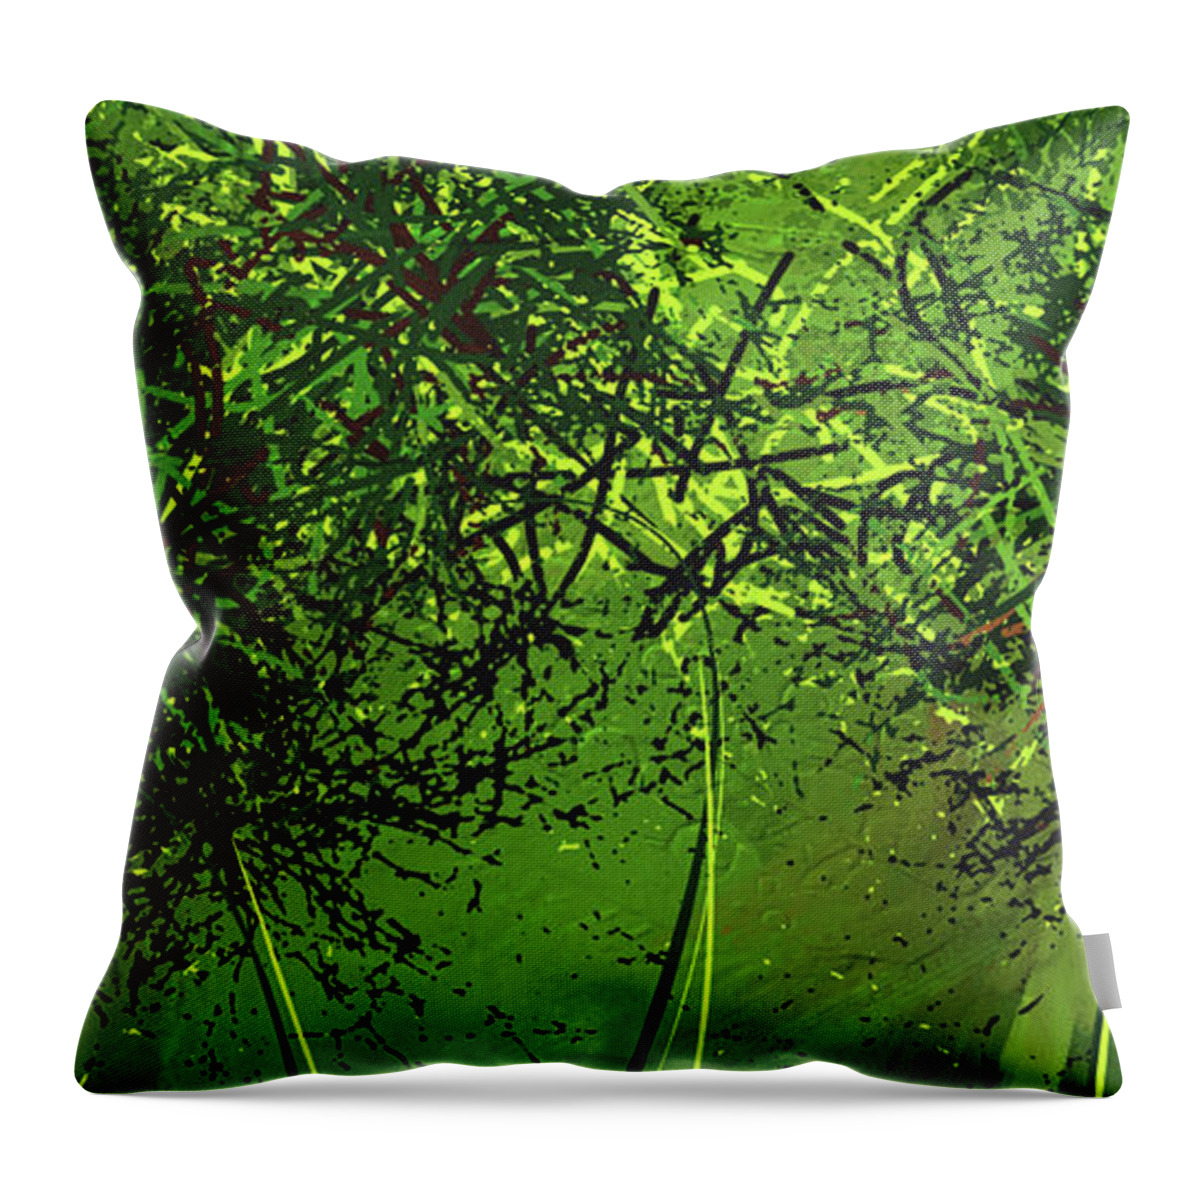 Green Throw Pillow featuring the painting Green Explosions - Green Modern Art by Lourry Legarde